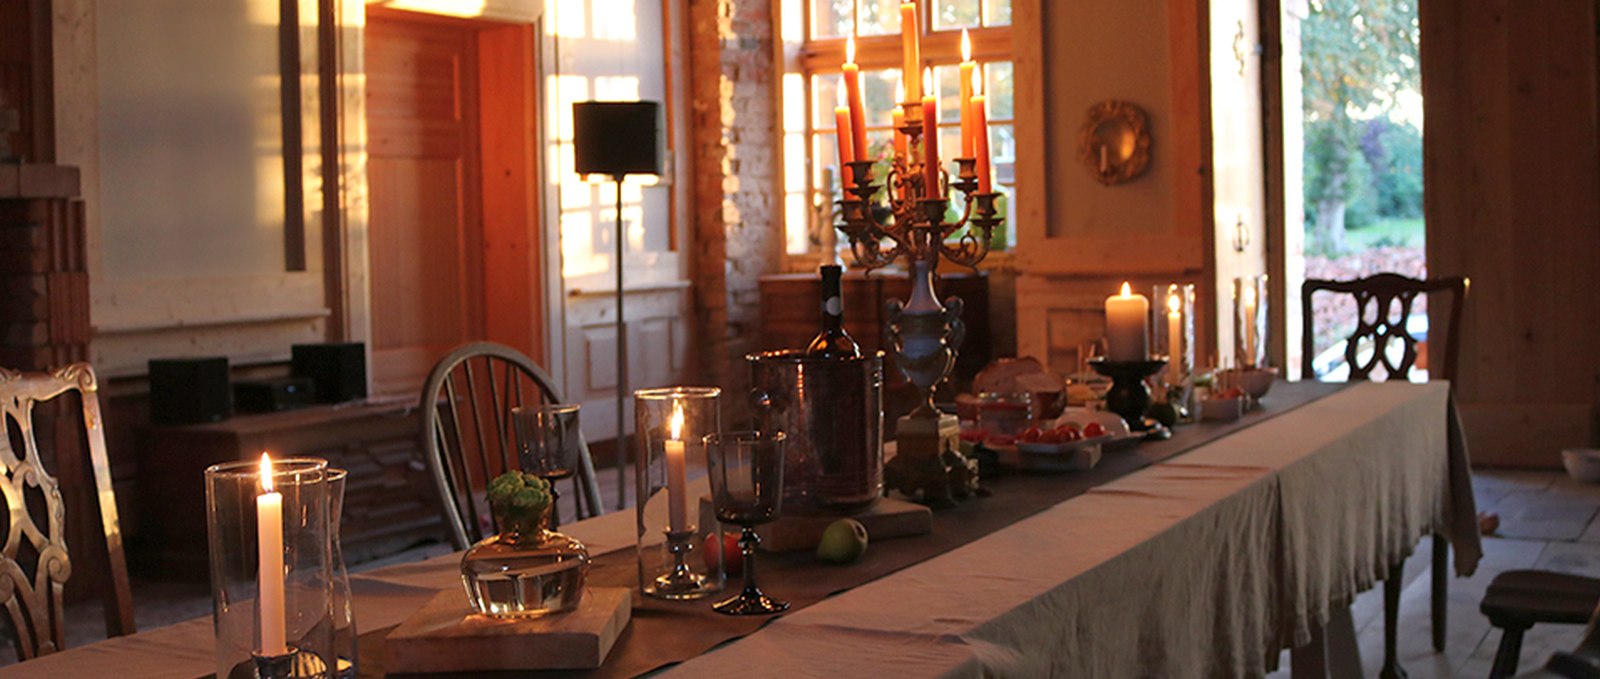 Country pleasure at Goldenbow manor house: feast and chat together with guests, © Herrenhaus Goldenbow